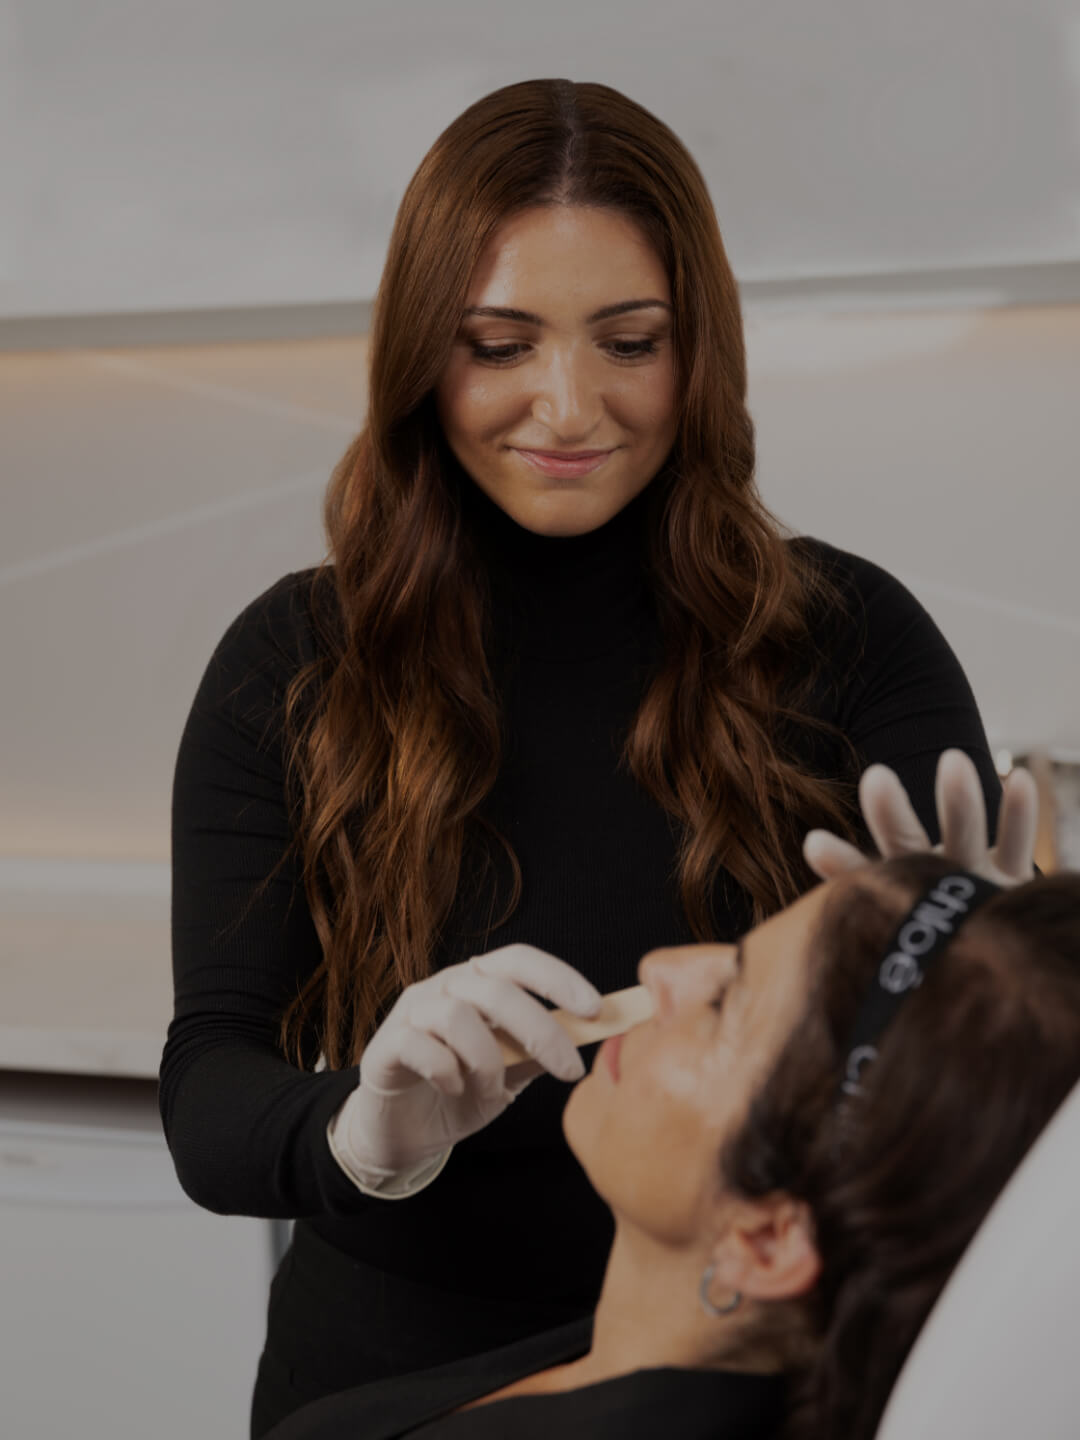 Medico-aesthetic technician Sonia D'Antico applying gel to her patient's face before an IPL treatment